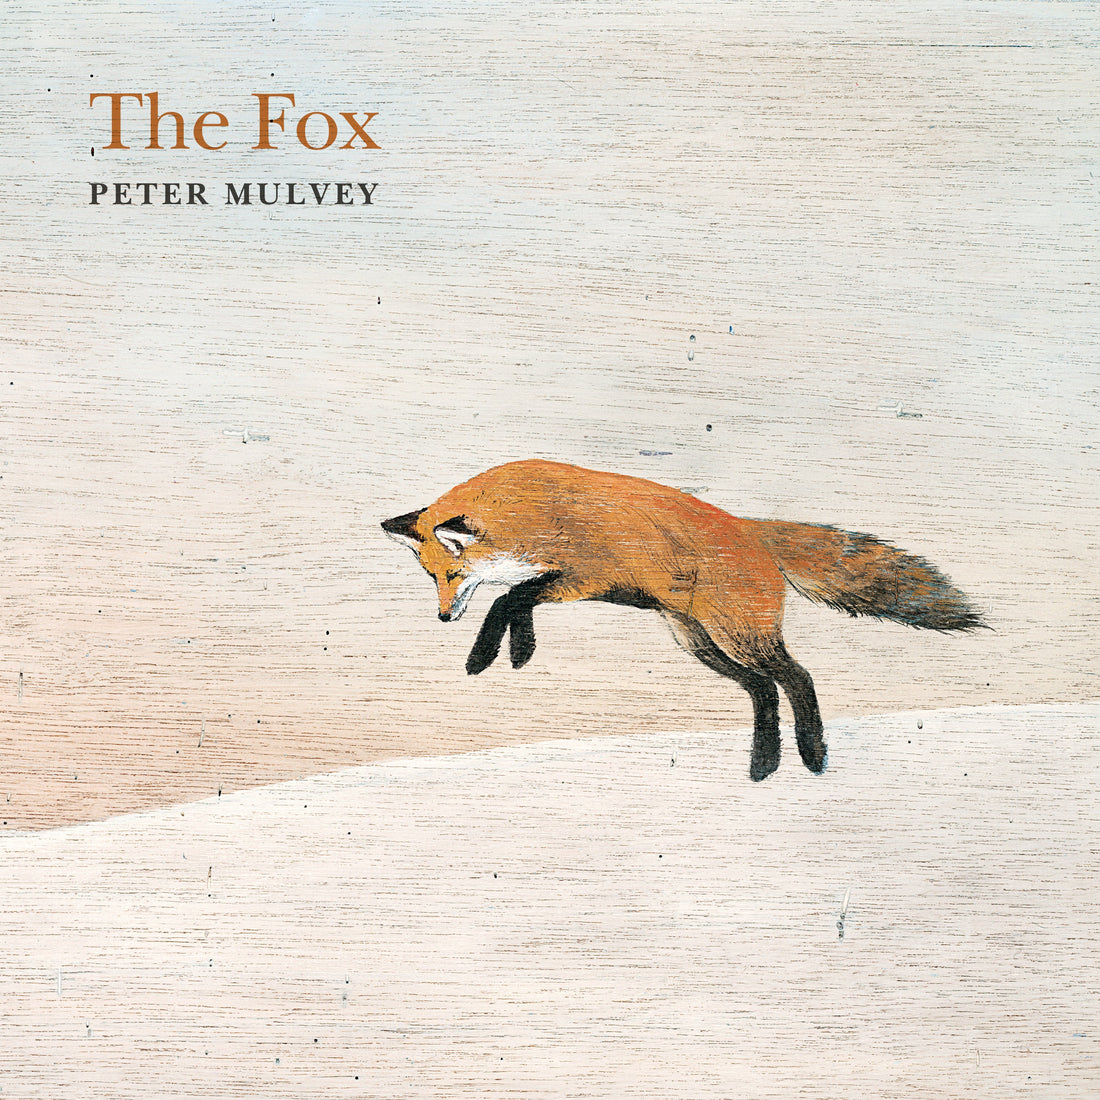 New single "The Fox" from Peter Mulvey